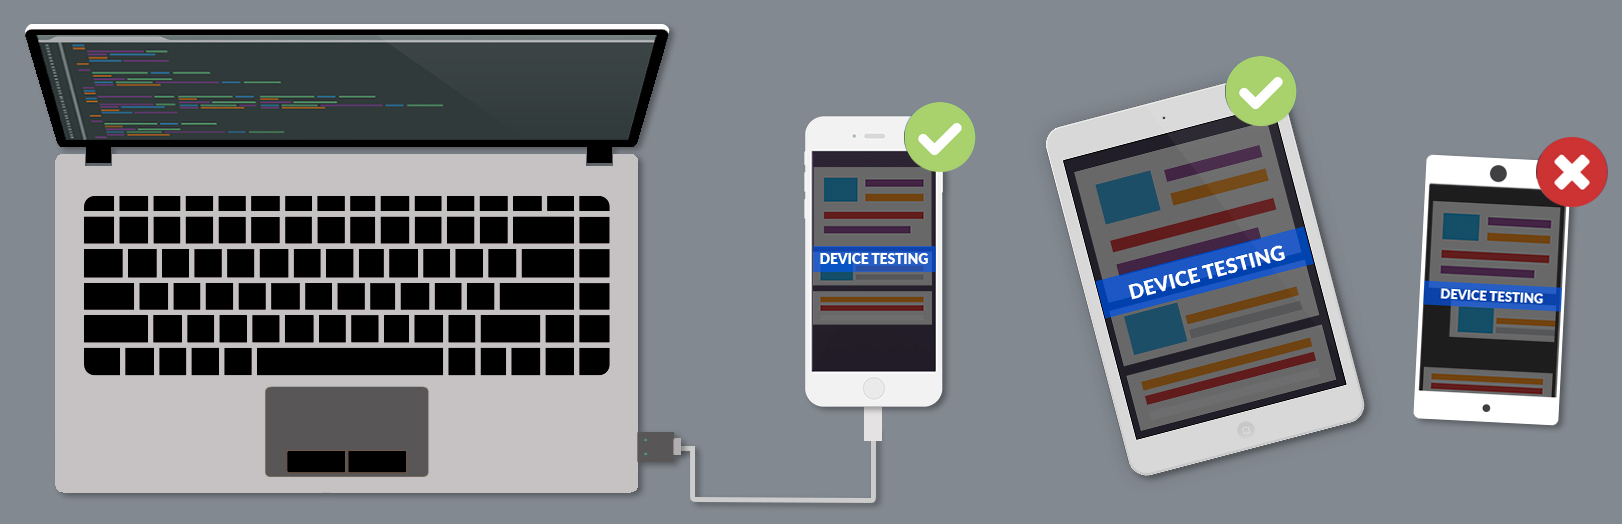 Image showing the testing process on phones/tablets